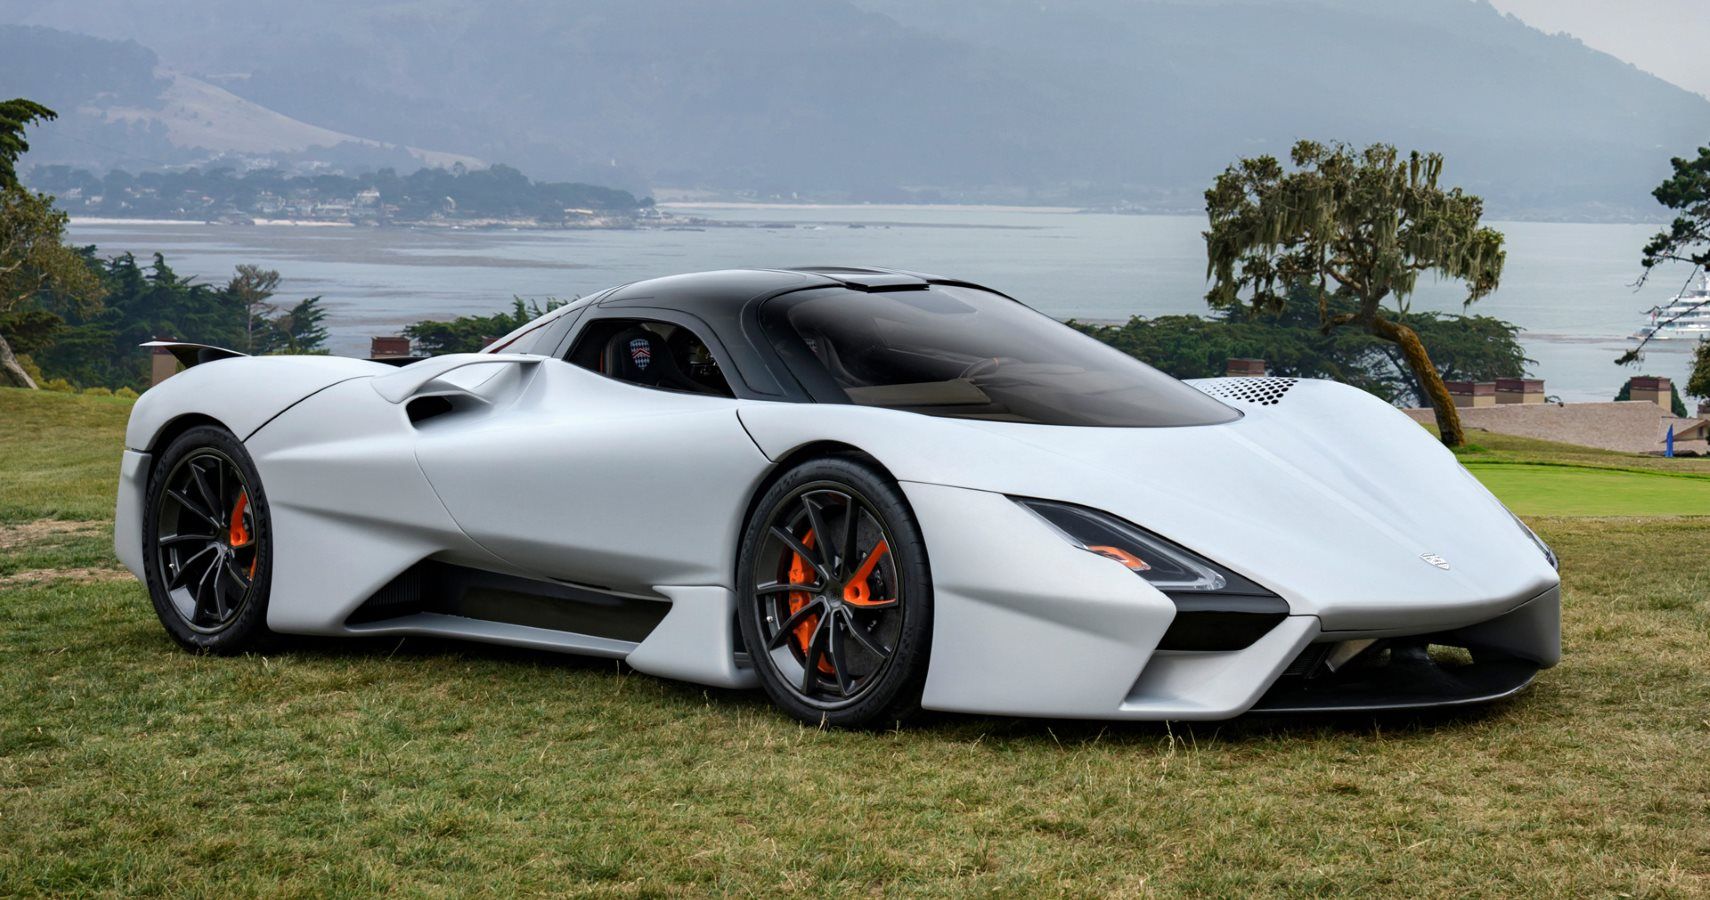 Check Out The SSC Tuatara Up Close And Personal In Walk Around Video